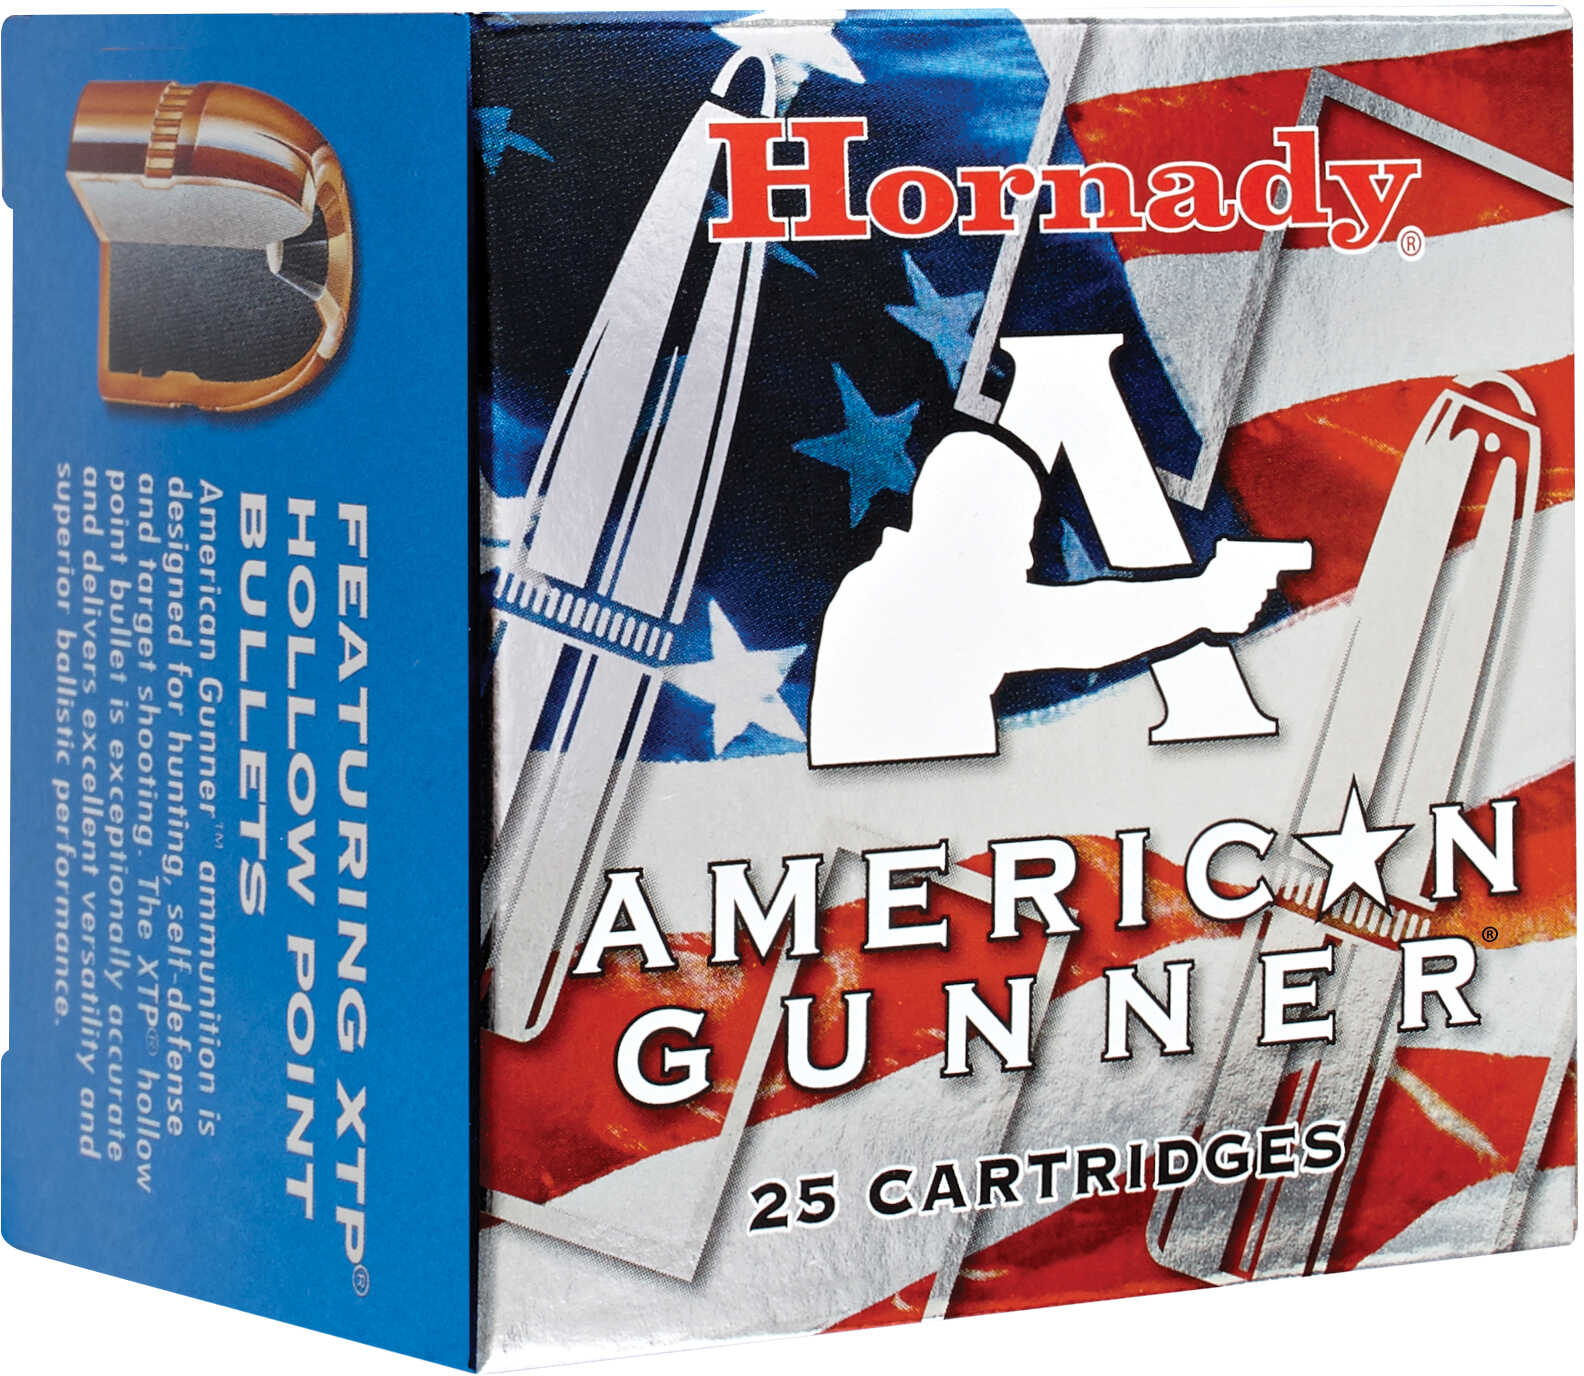 9mm Luger 124 Grain Jacketed Hollow Point 25 Rounds Hornady Ammunition